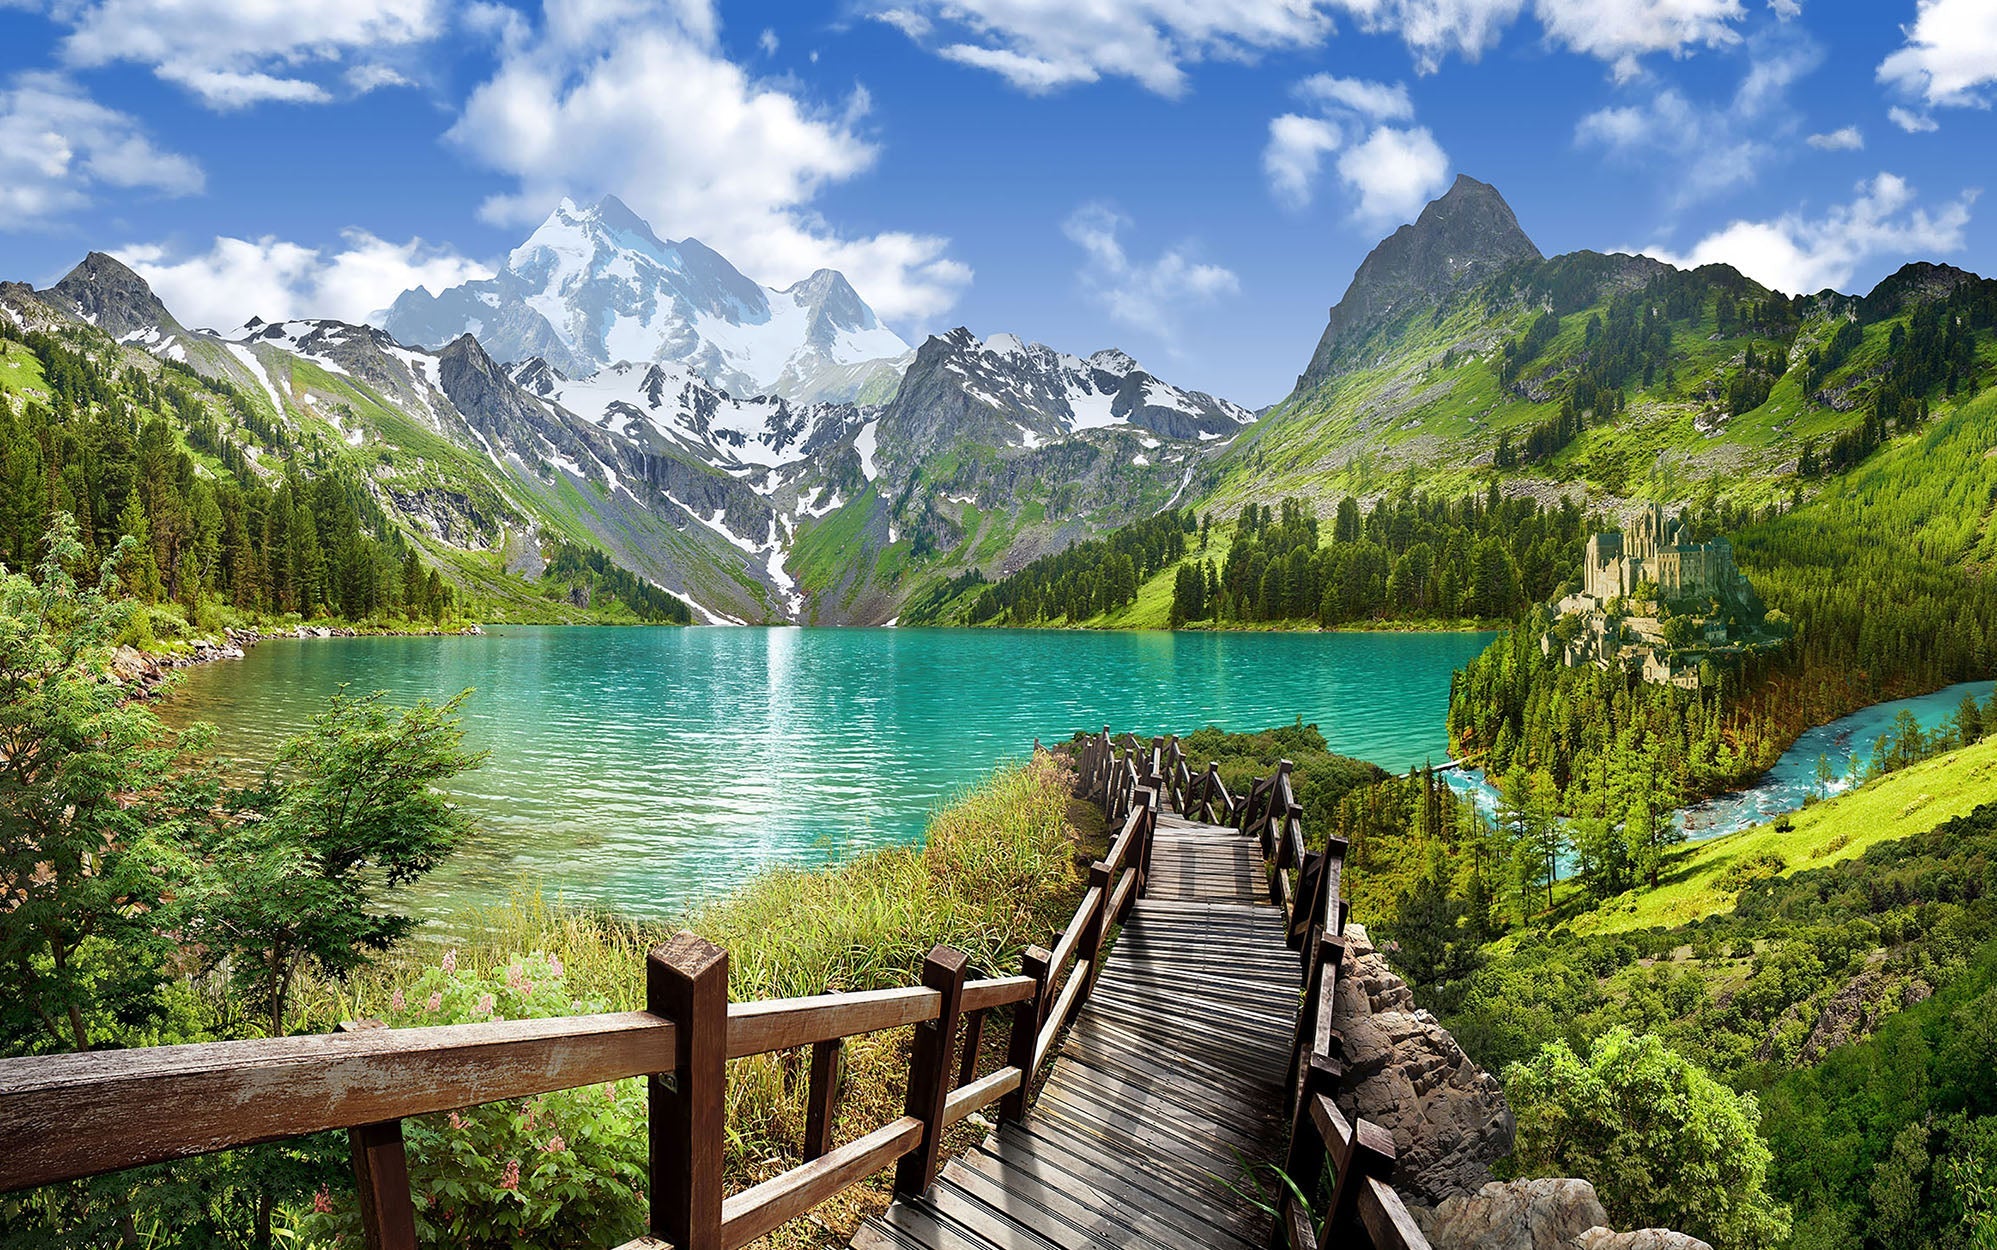 Wall mural of a scenic mountain lake with a wooden walkway leading towards it, depicting vibrant greenery and snow-capped mountains in the background